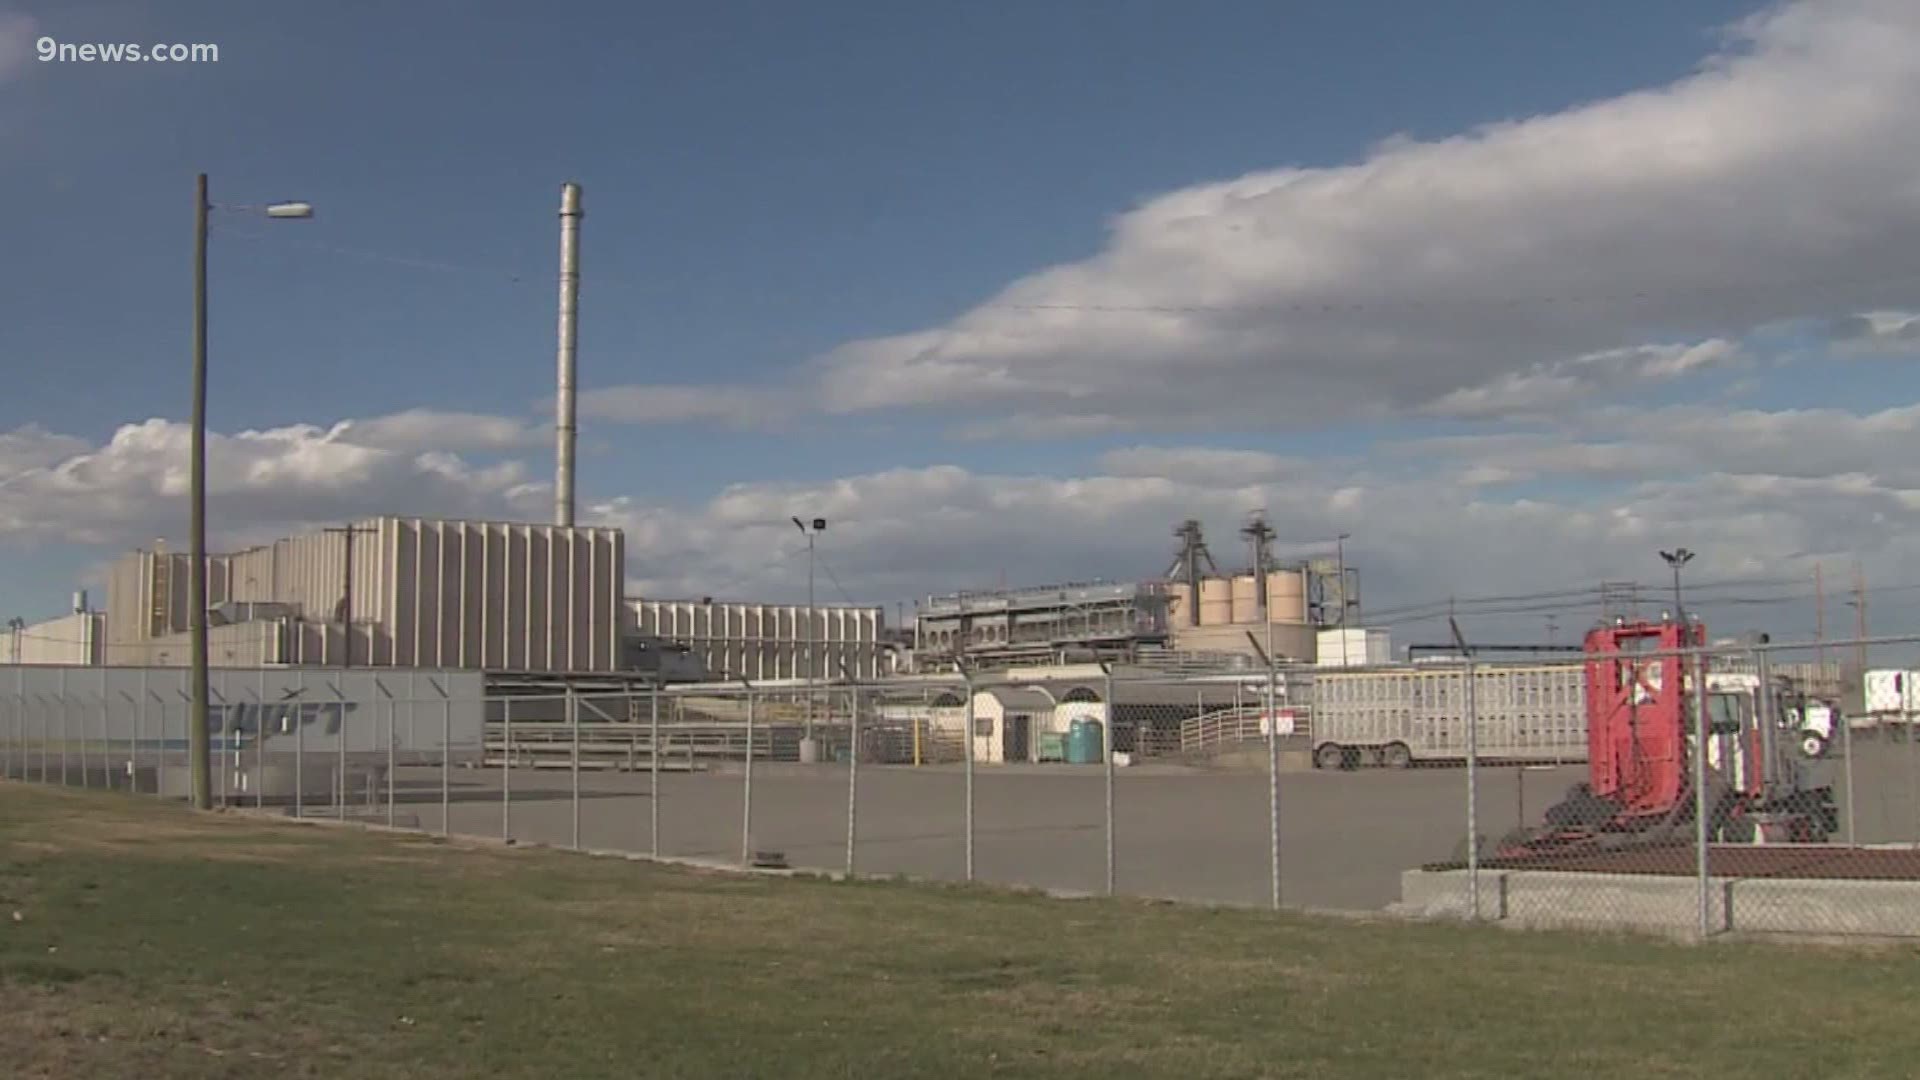 Four employees at the JBS meatpacking plant in Greeley have died of COVID-19 and more than 100 workers there are sick.